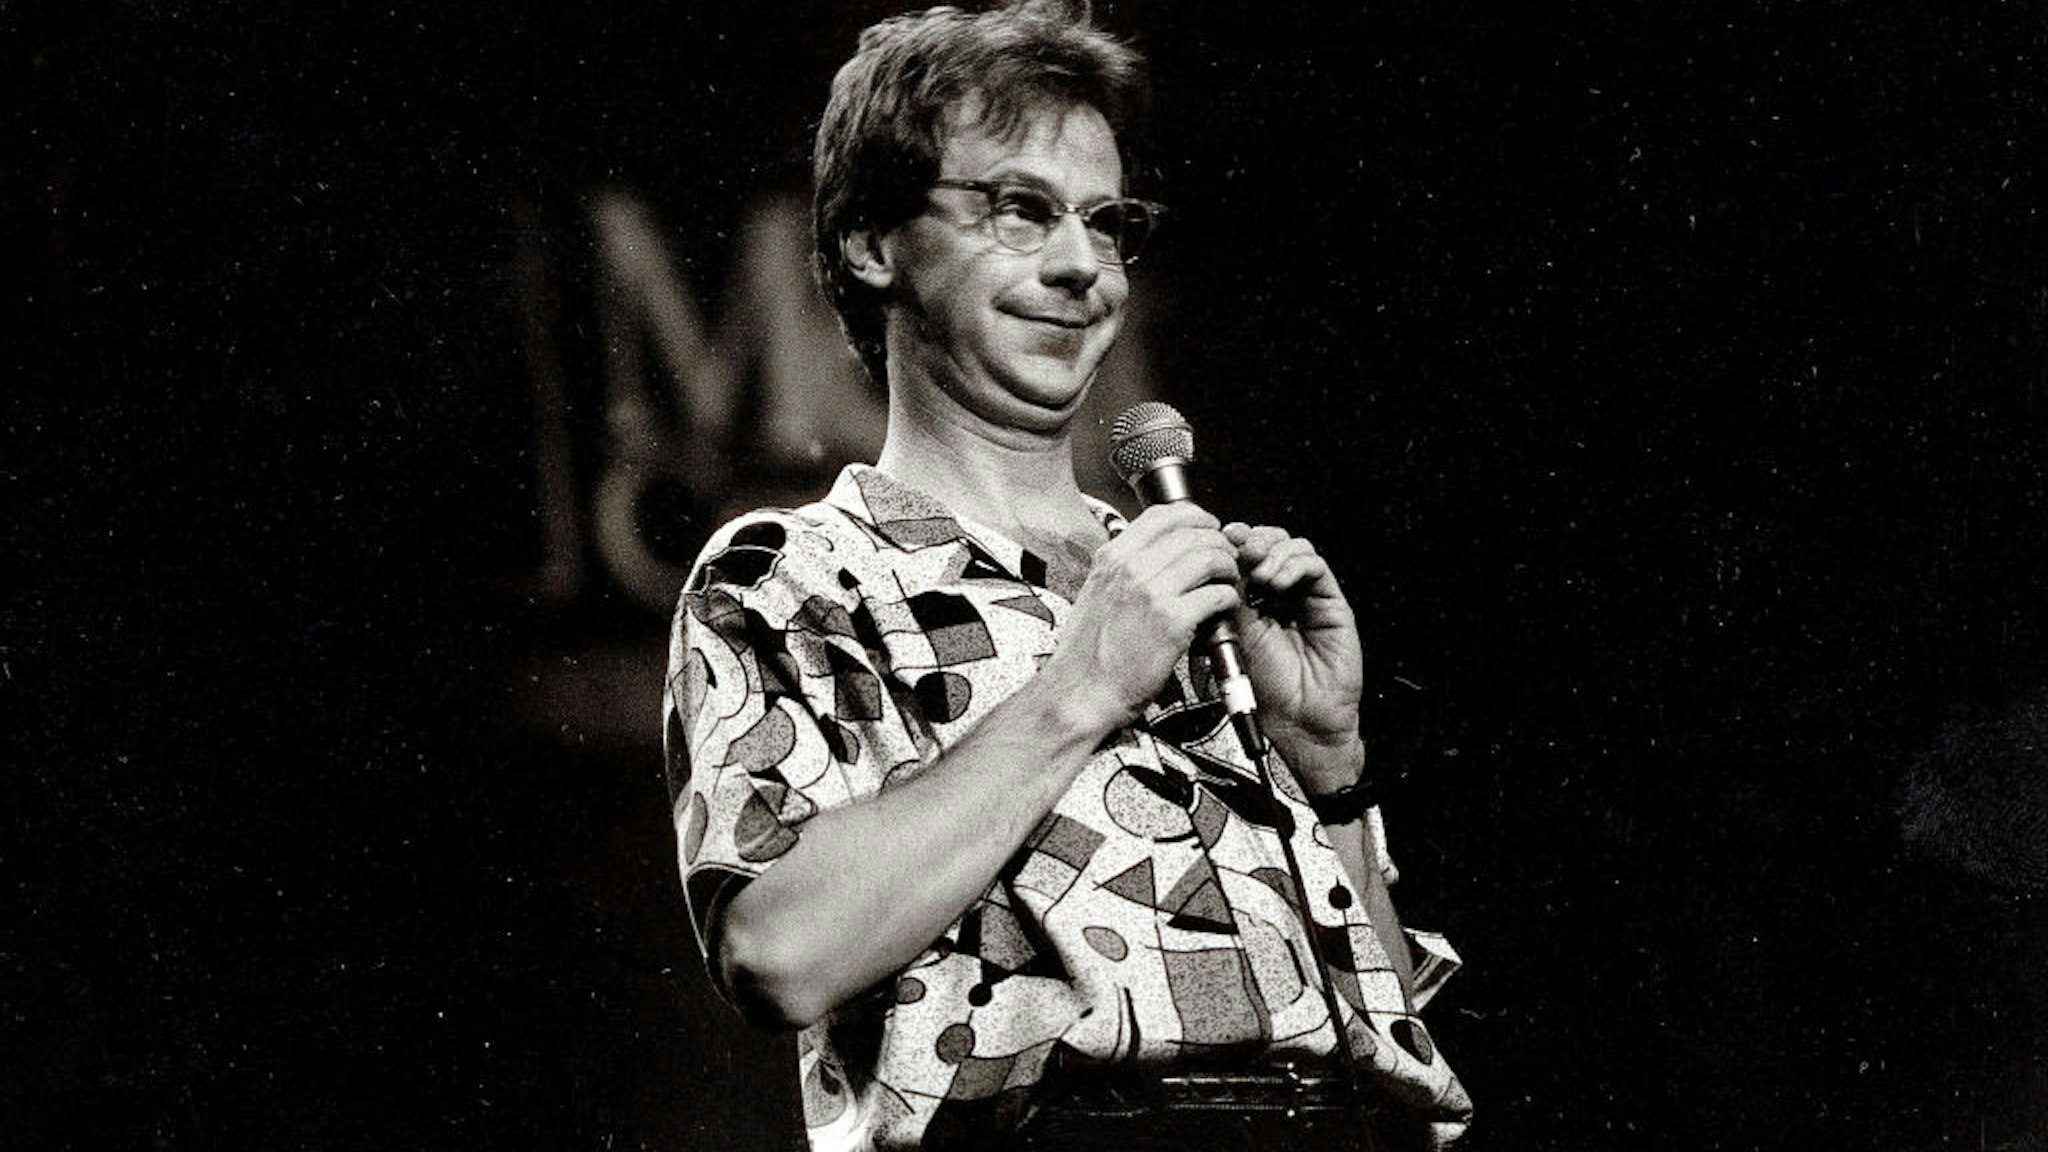 View of comedian Dana Carvey performing onstage, Chicago, Illinois, November 4, 1990. (Photo by Paul Natkin/Getty Images)